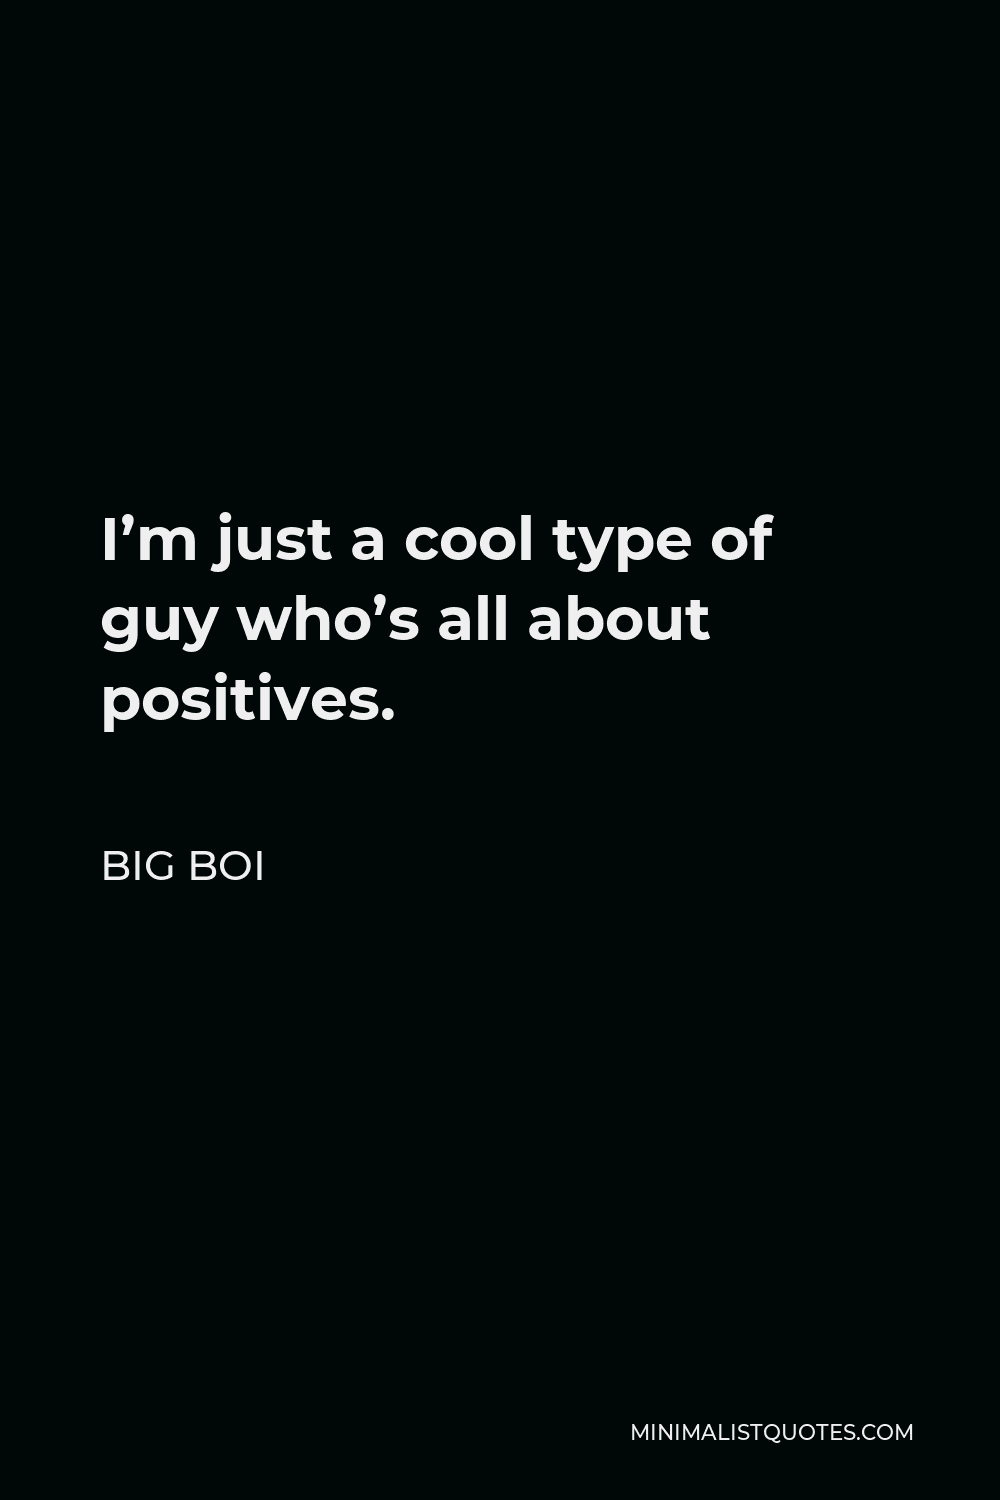 Big Boi Quote - I’m just a cool type of guy who’s all about positives.